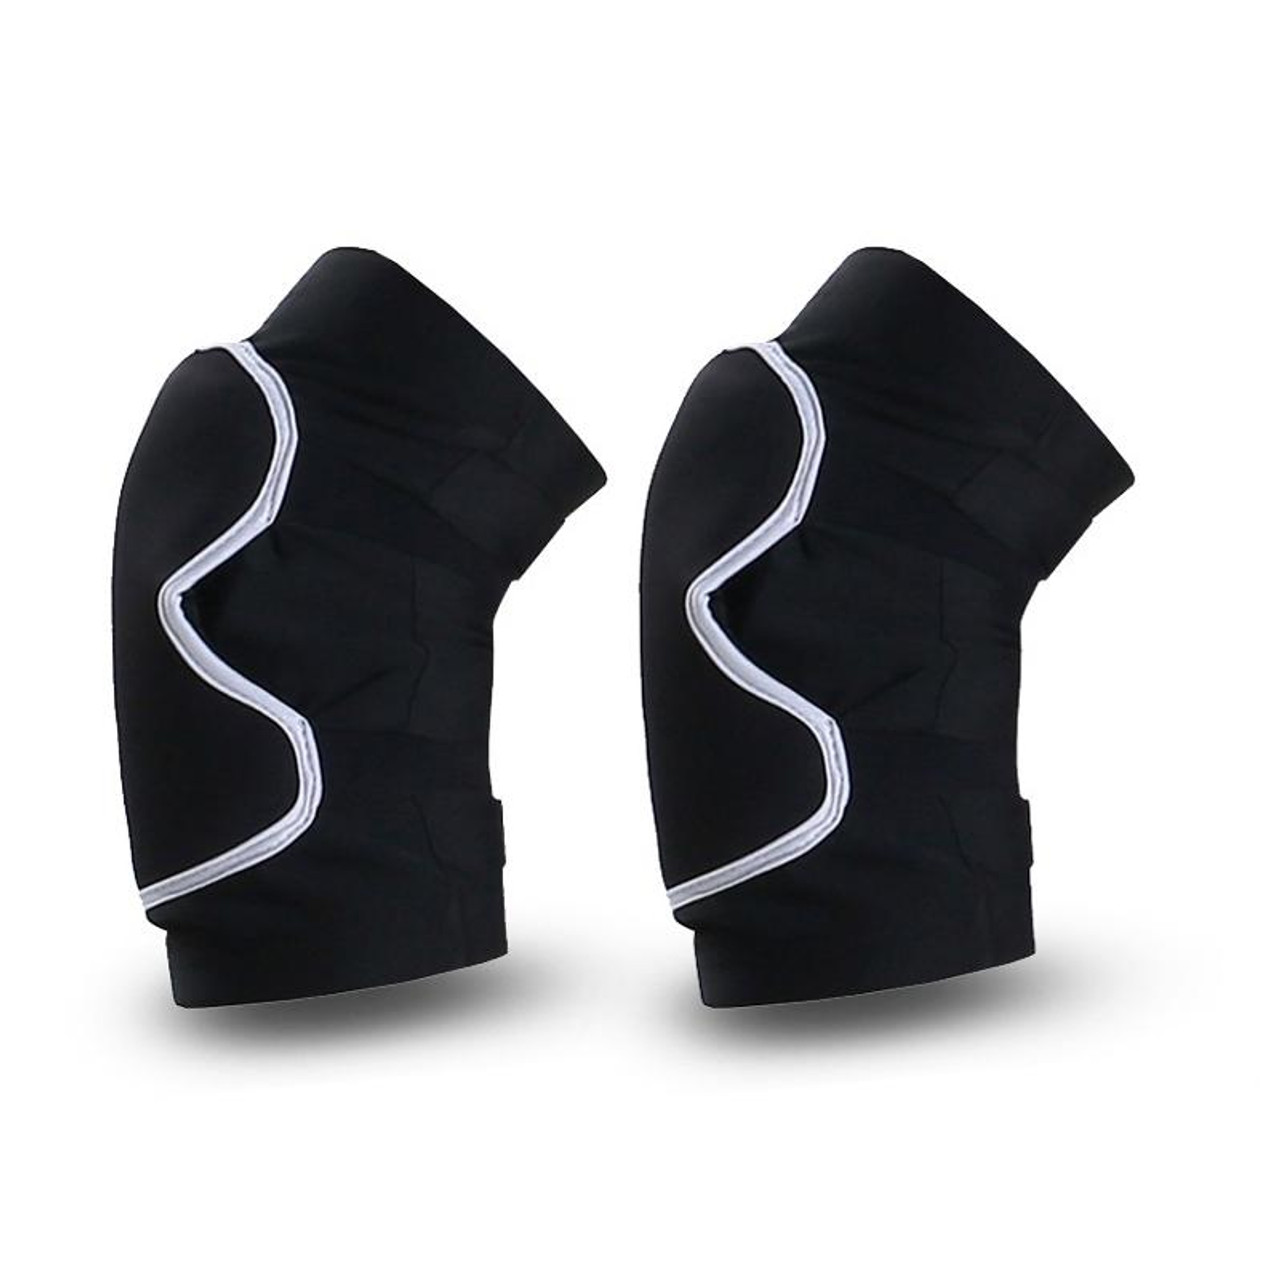 A Pair Sports Knee Pads Long Warm Compression Leggings Basketball